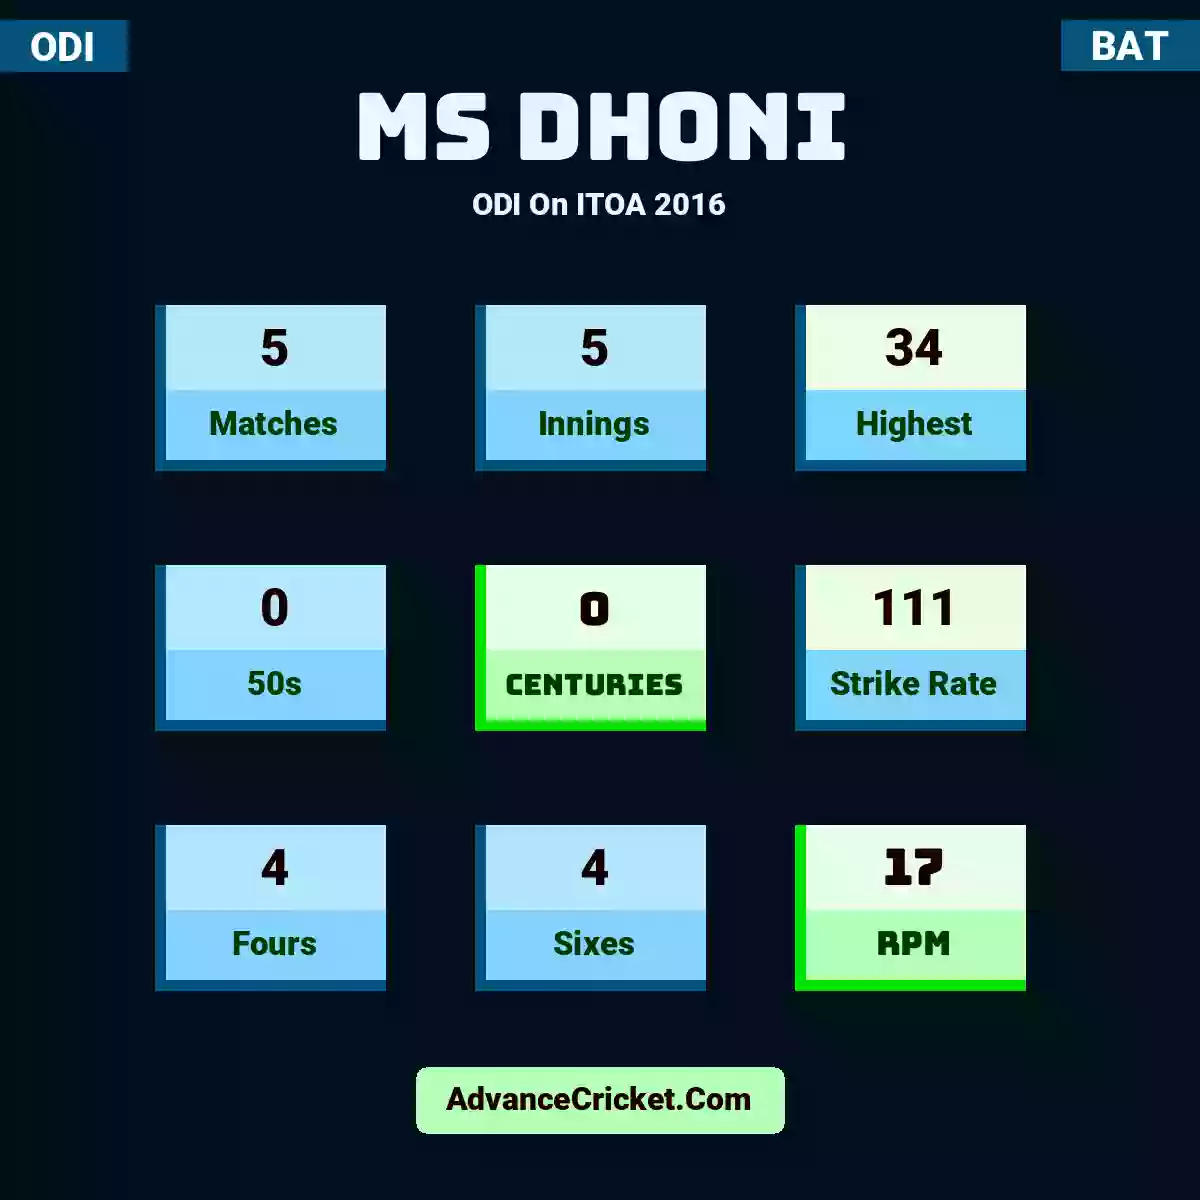 MS Dhoni ODI  On ITOA 2016, MS Dhoni played 5 matches, scored 34 runs as highest, 0 half-centuries, and 0 centuries, with a strike rate of 111. M.Dhoni hit 4 fours and 4 sixes, with an RPM of 17.